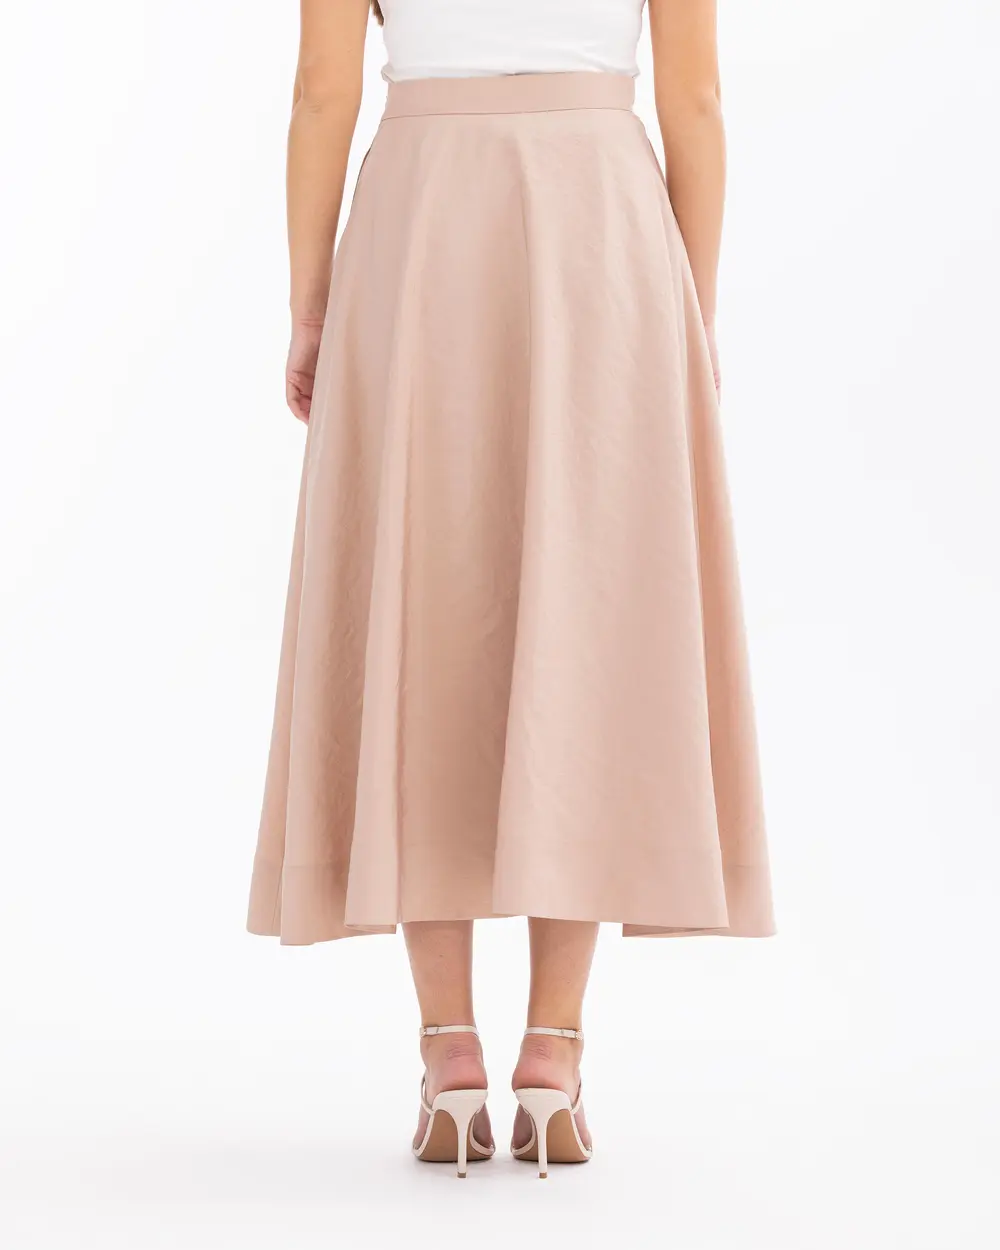 Maxi Length Zippered Skirt with Pocket Detail